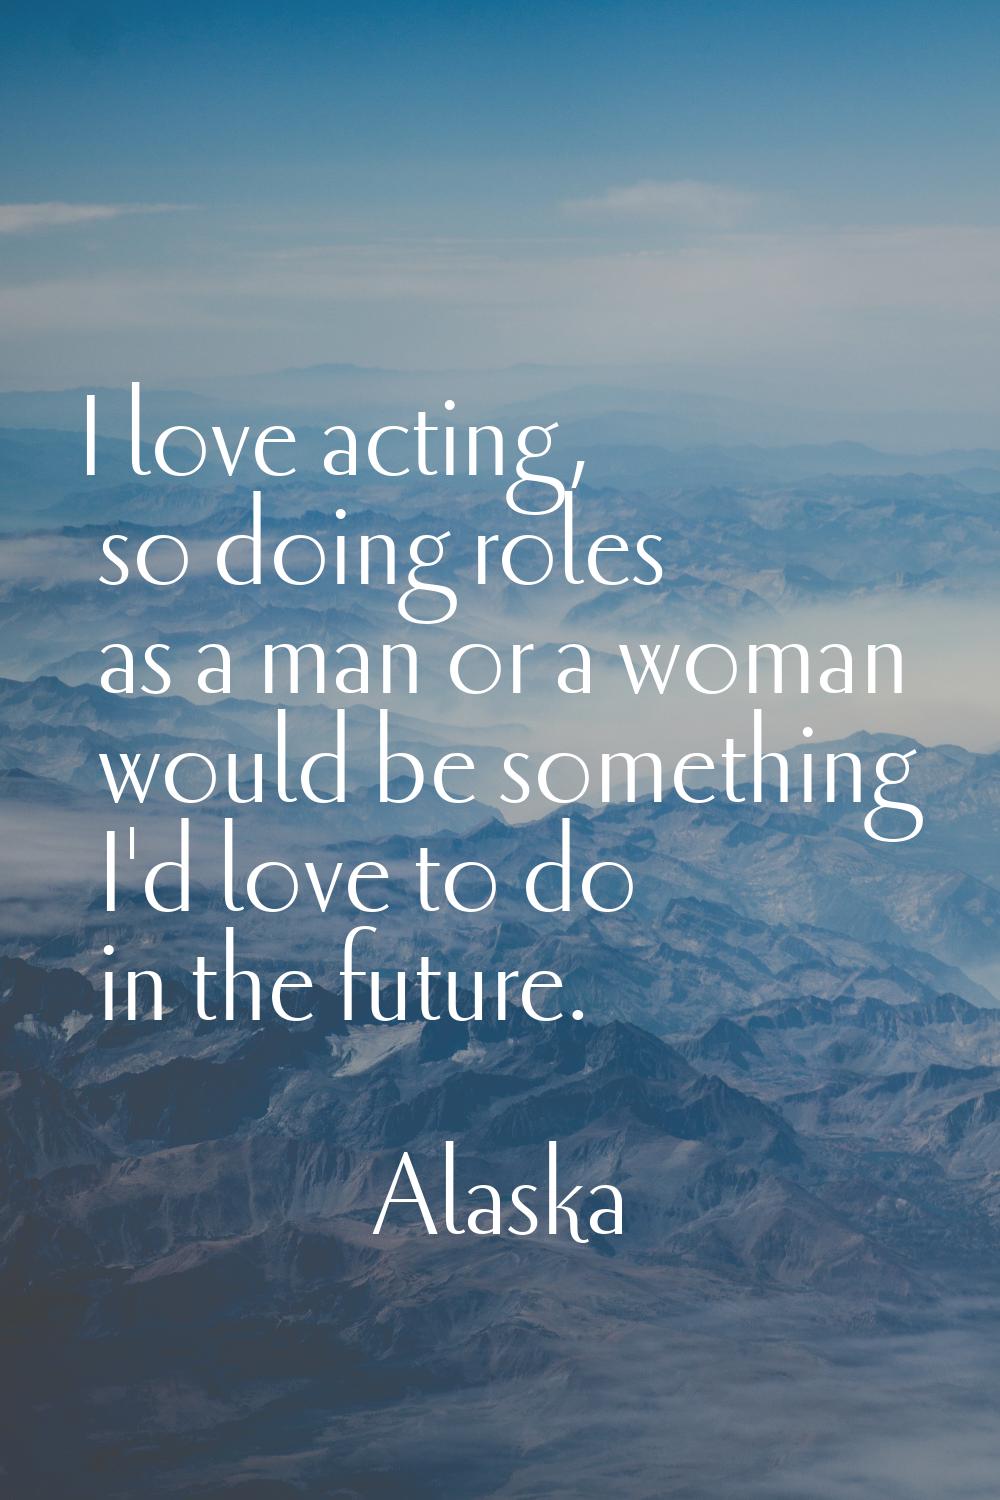 I love acting, so doing roles as a man or a woman would be something I'd love to do in the future.